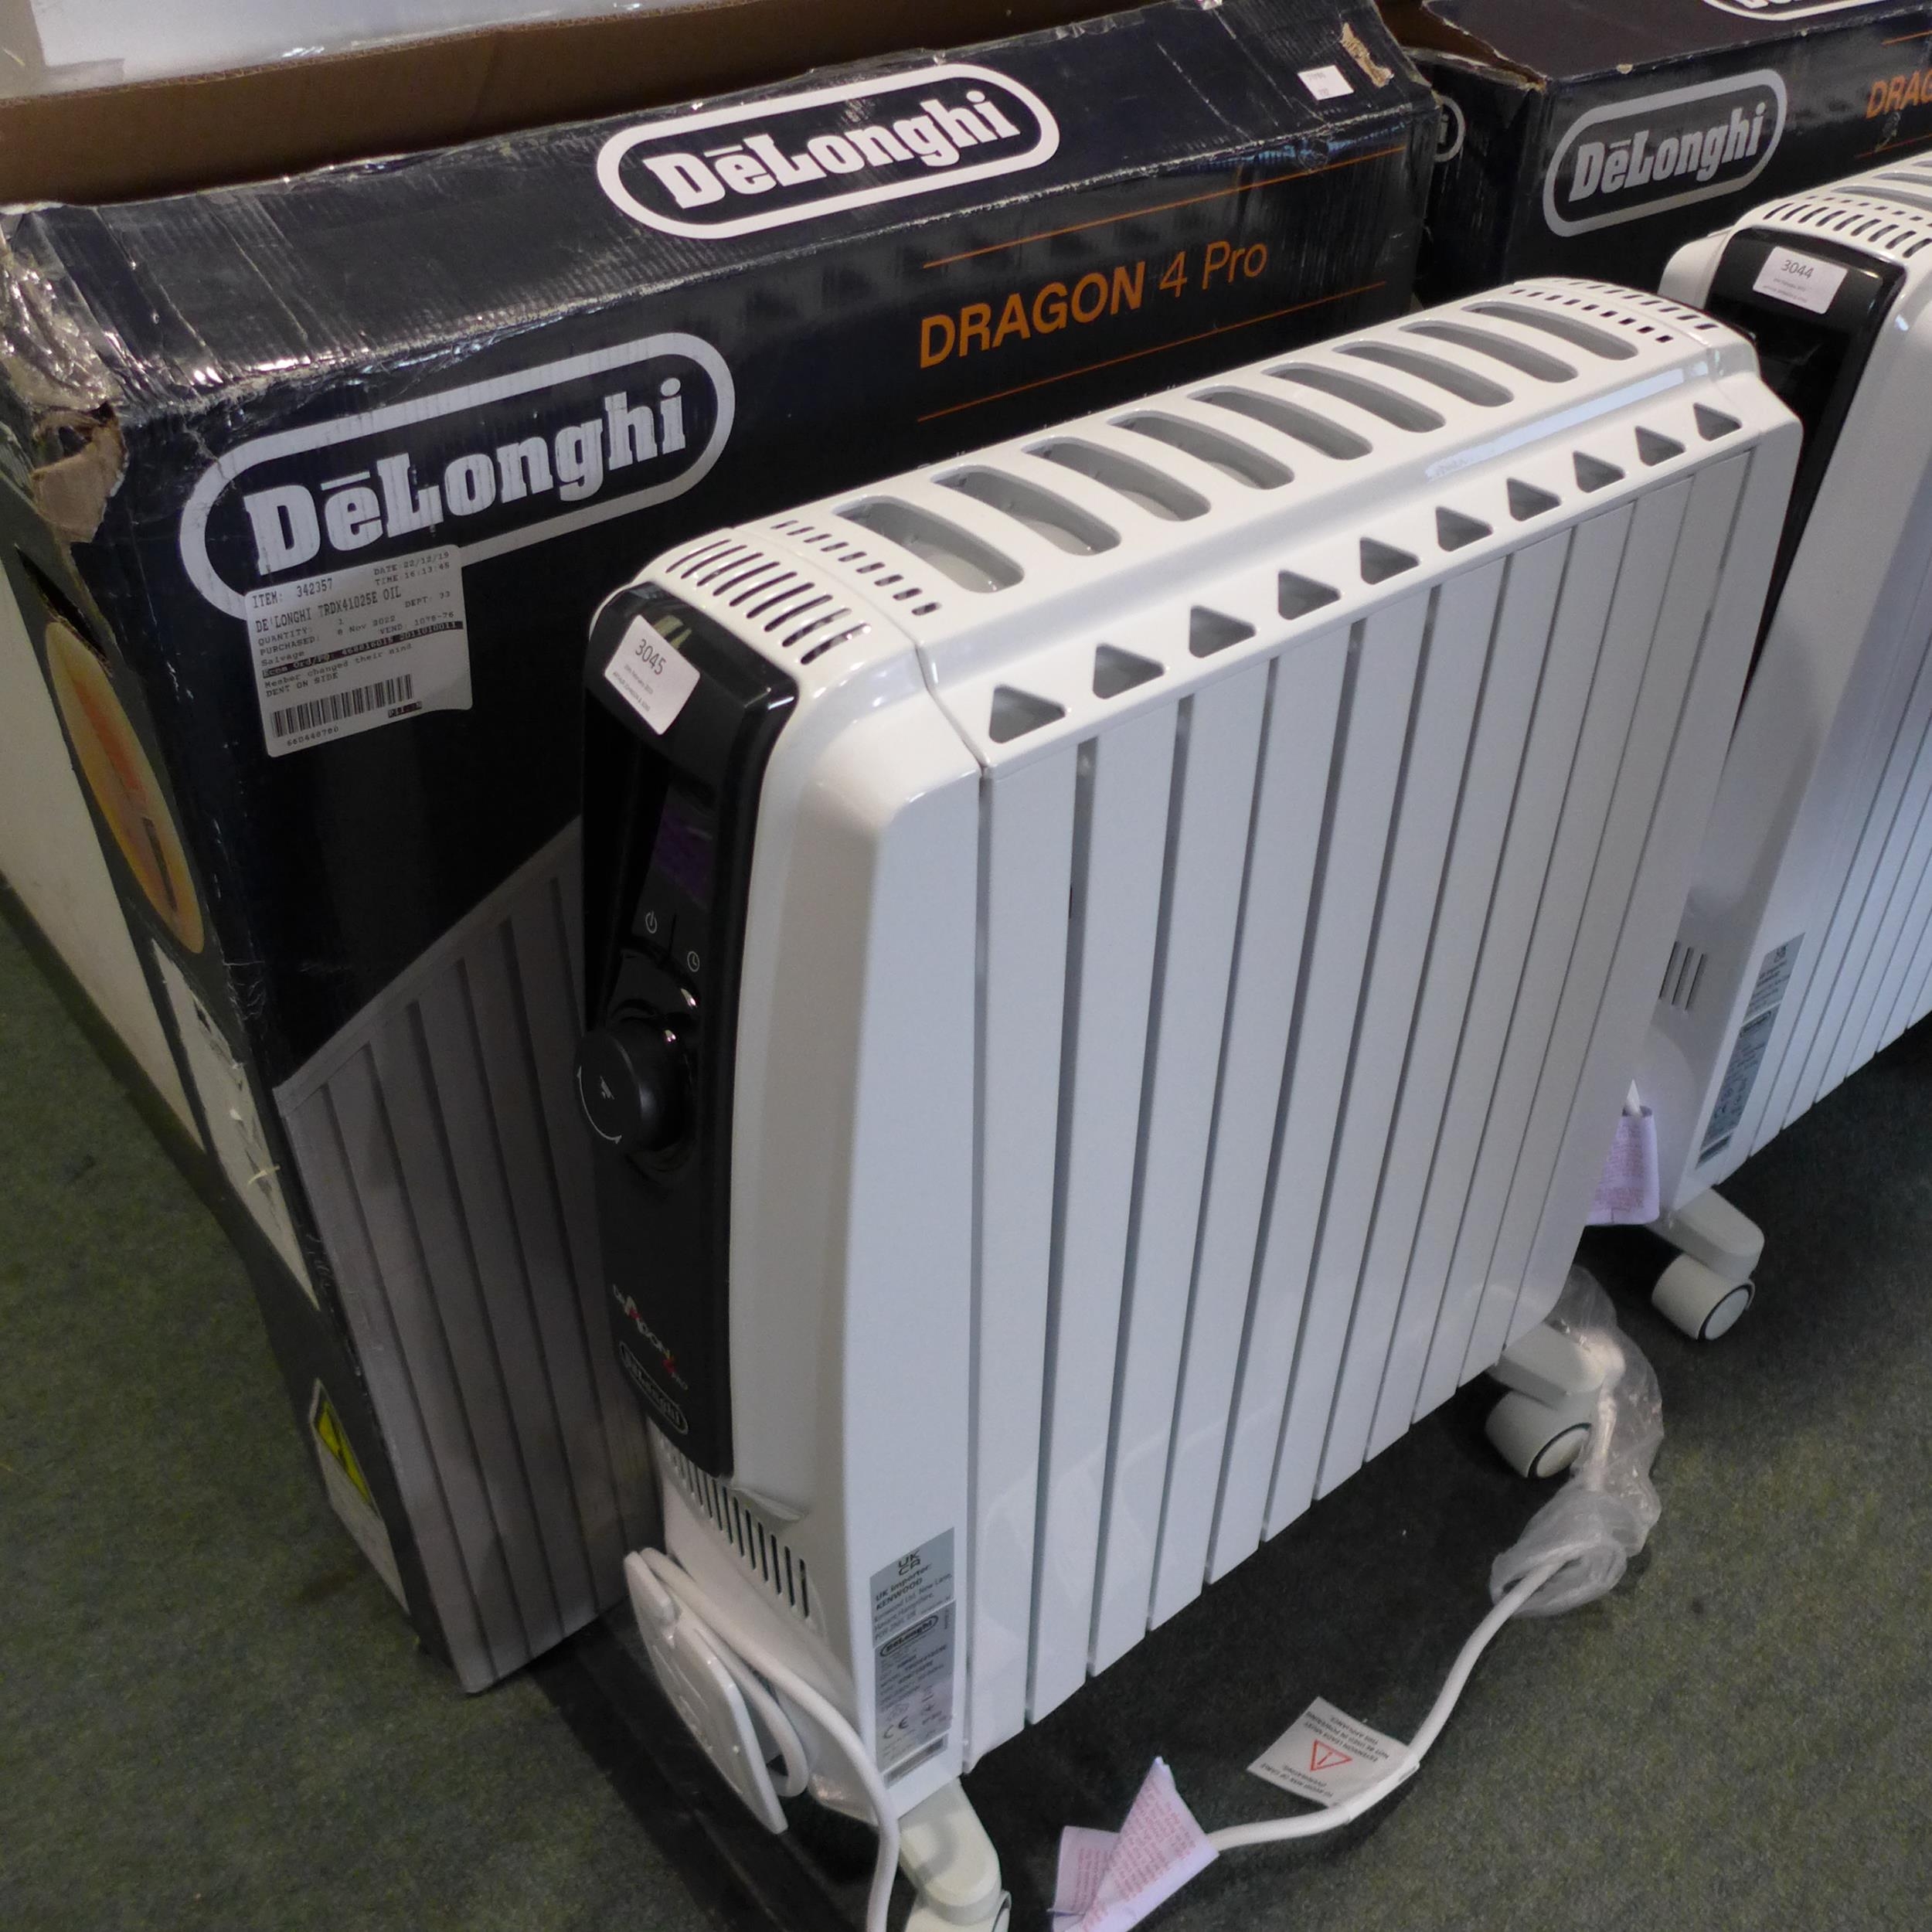 Delonghi oil filled radiator - Dragon4 - model no Trdx41025E Oil (282-571)  * This lot is subject